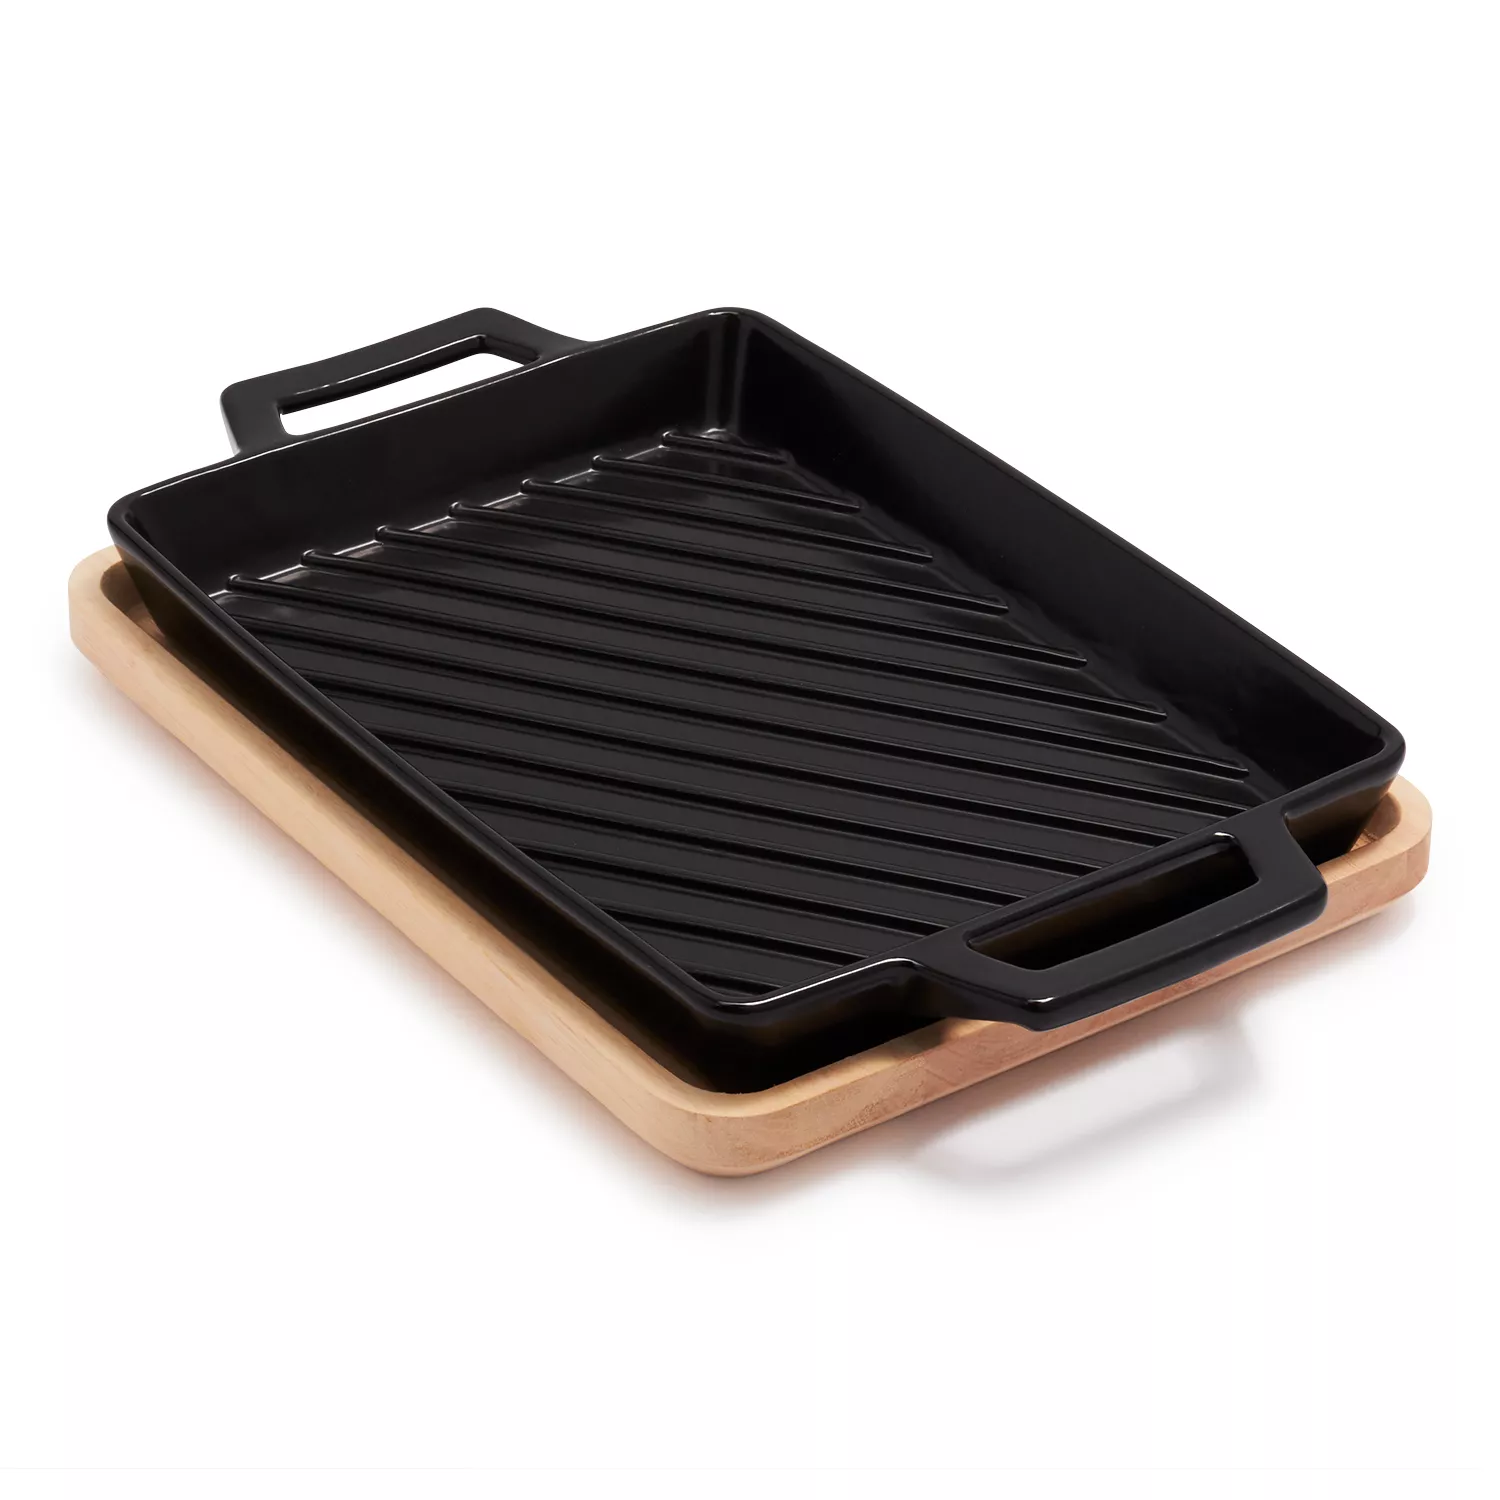 Oven-to-Table Ceramic Sheet Pan with Wood Trivet + Reviews